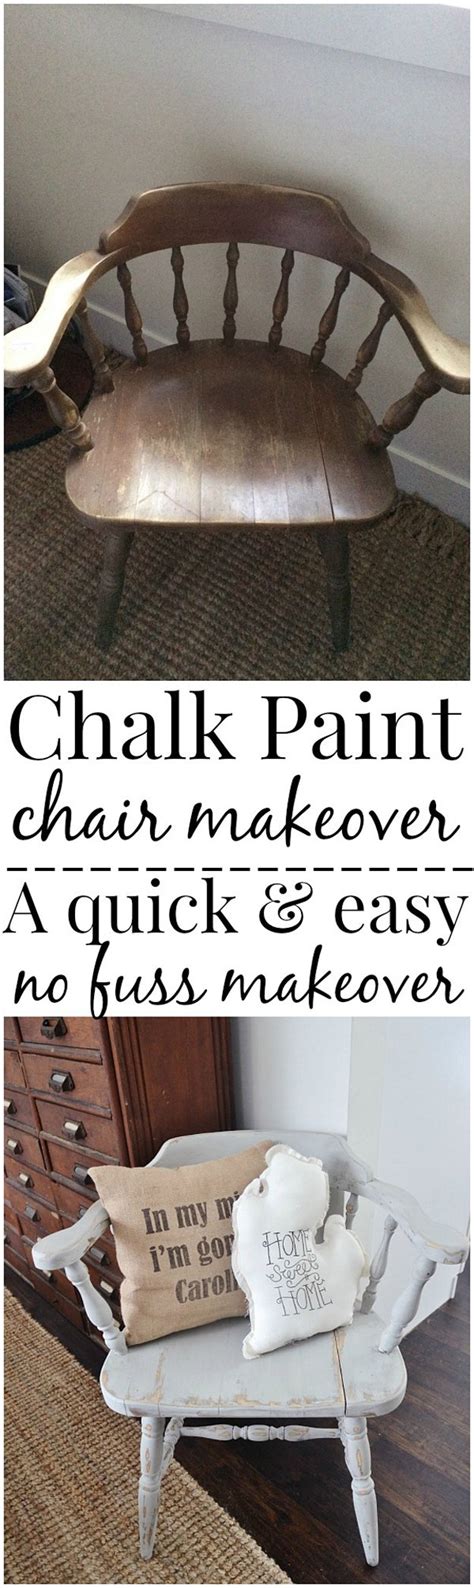 However, chalk paint can be used for more than decorative walls. Chalk Paint Furniture Ideas DIY Projects | Do It Yourself ...